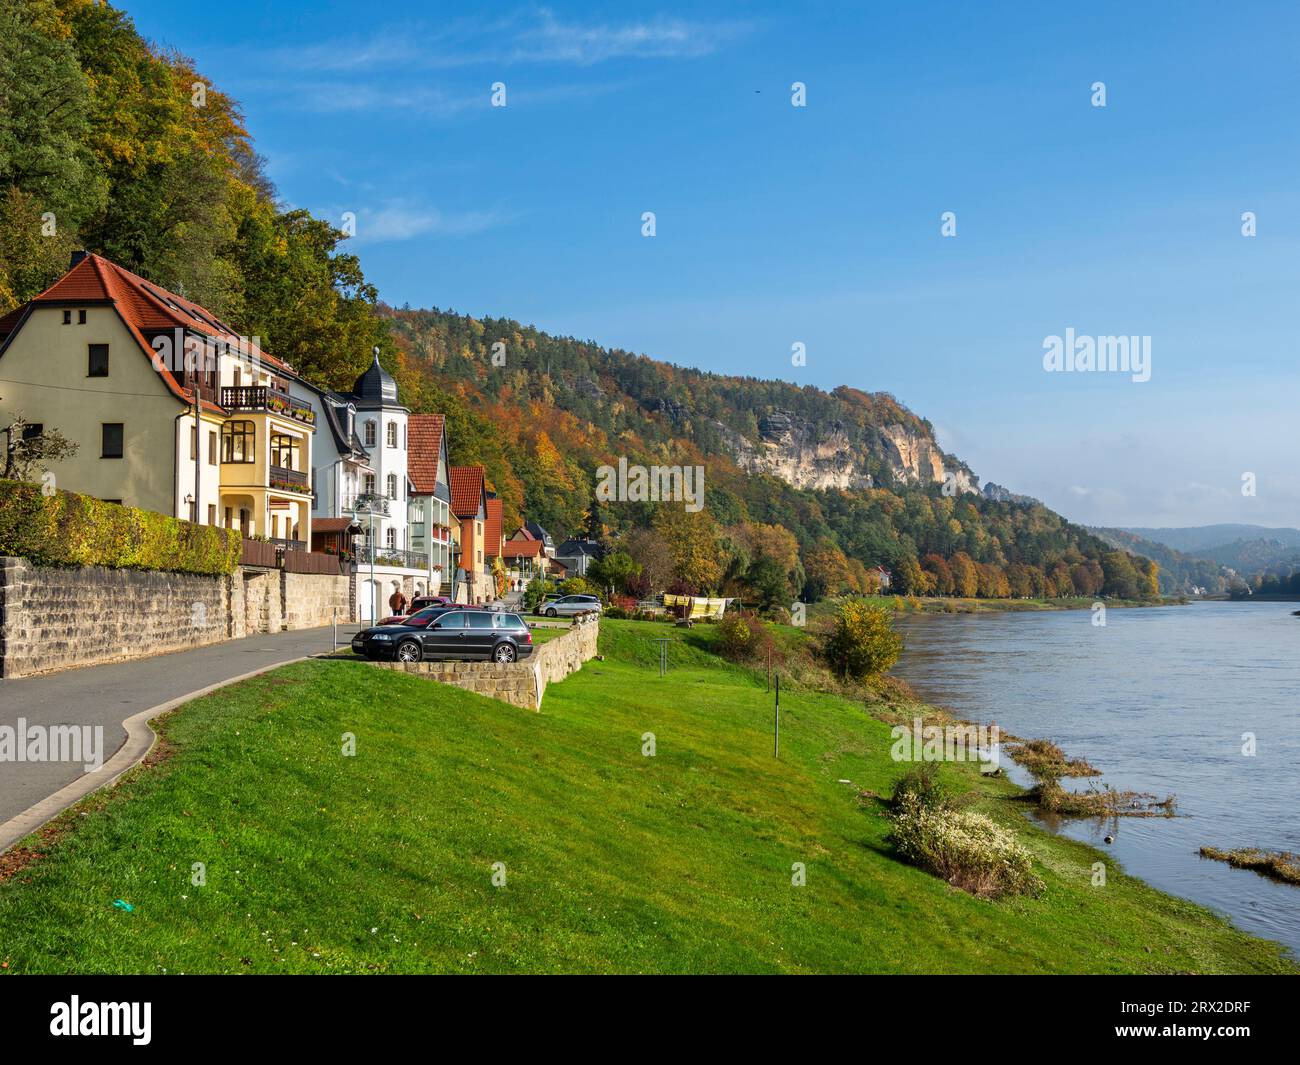 A view of Stadt Wehlen on the Elbe River in Saxon Switzerland National Park, Saxony, Germany, Europe Stock Photo